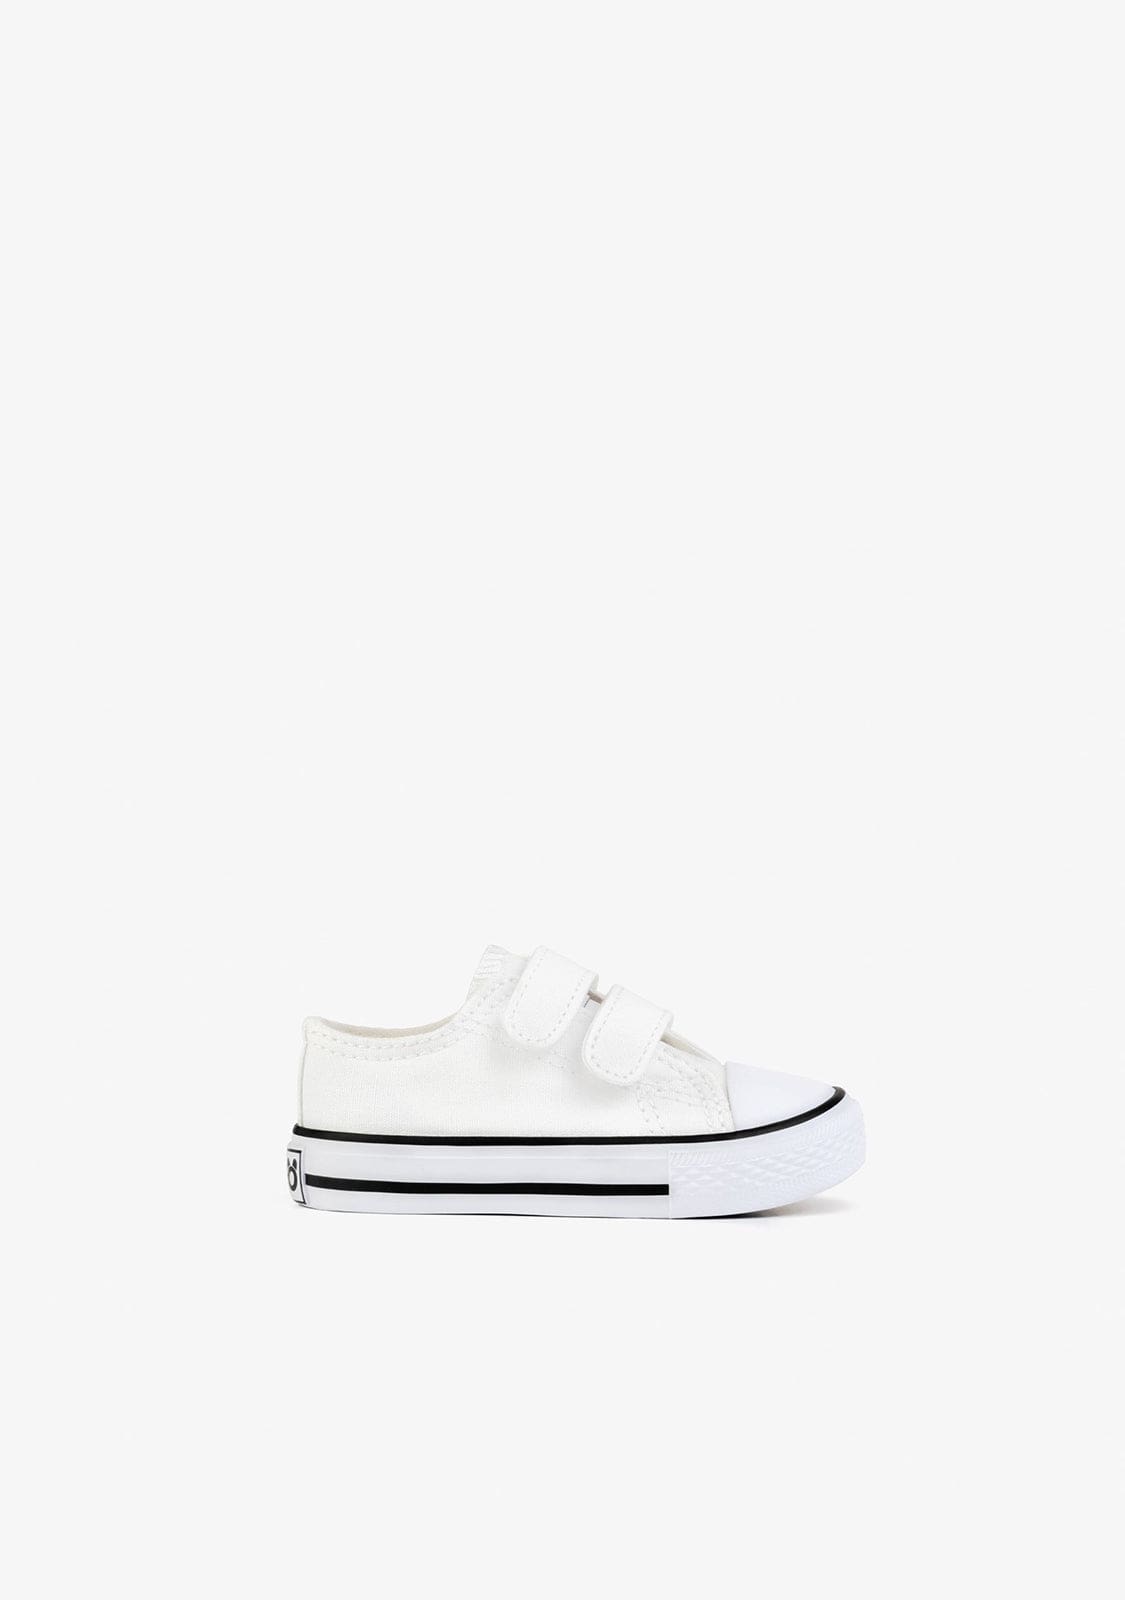 OSITO Shoes Baby's White Adherent Strips Sneakers Canvas